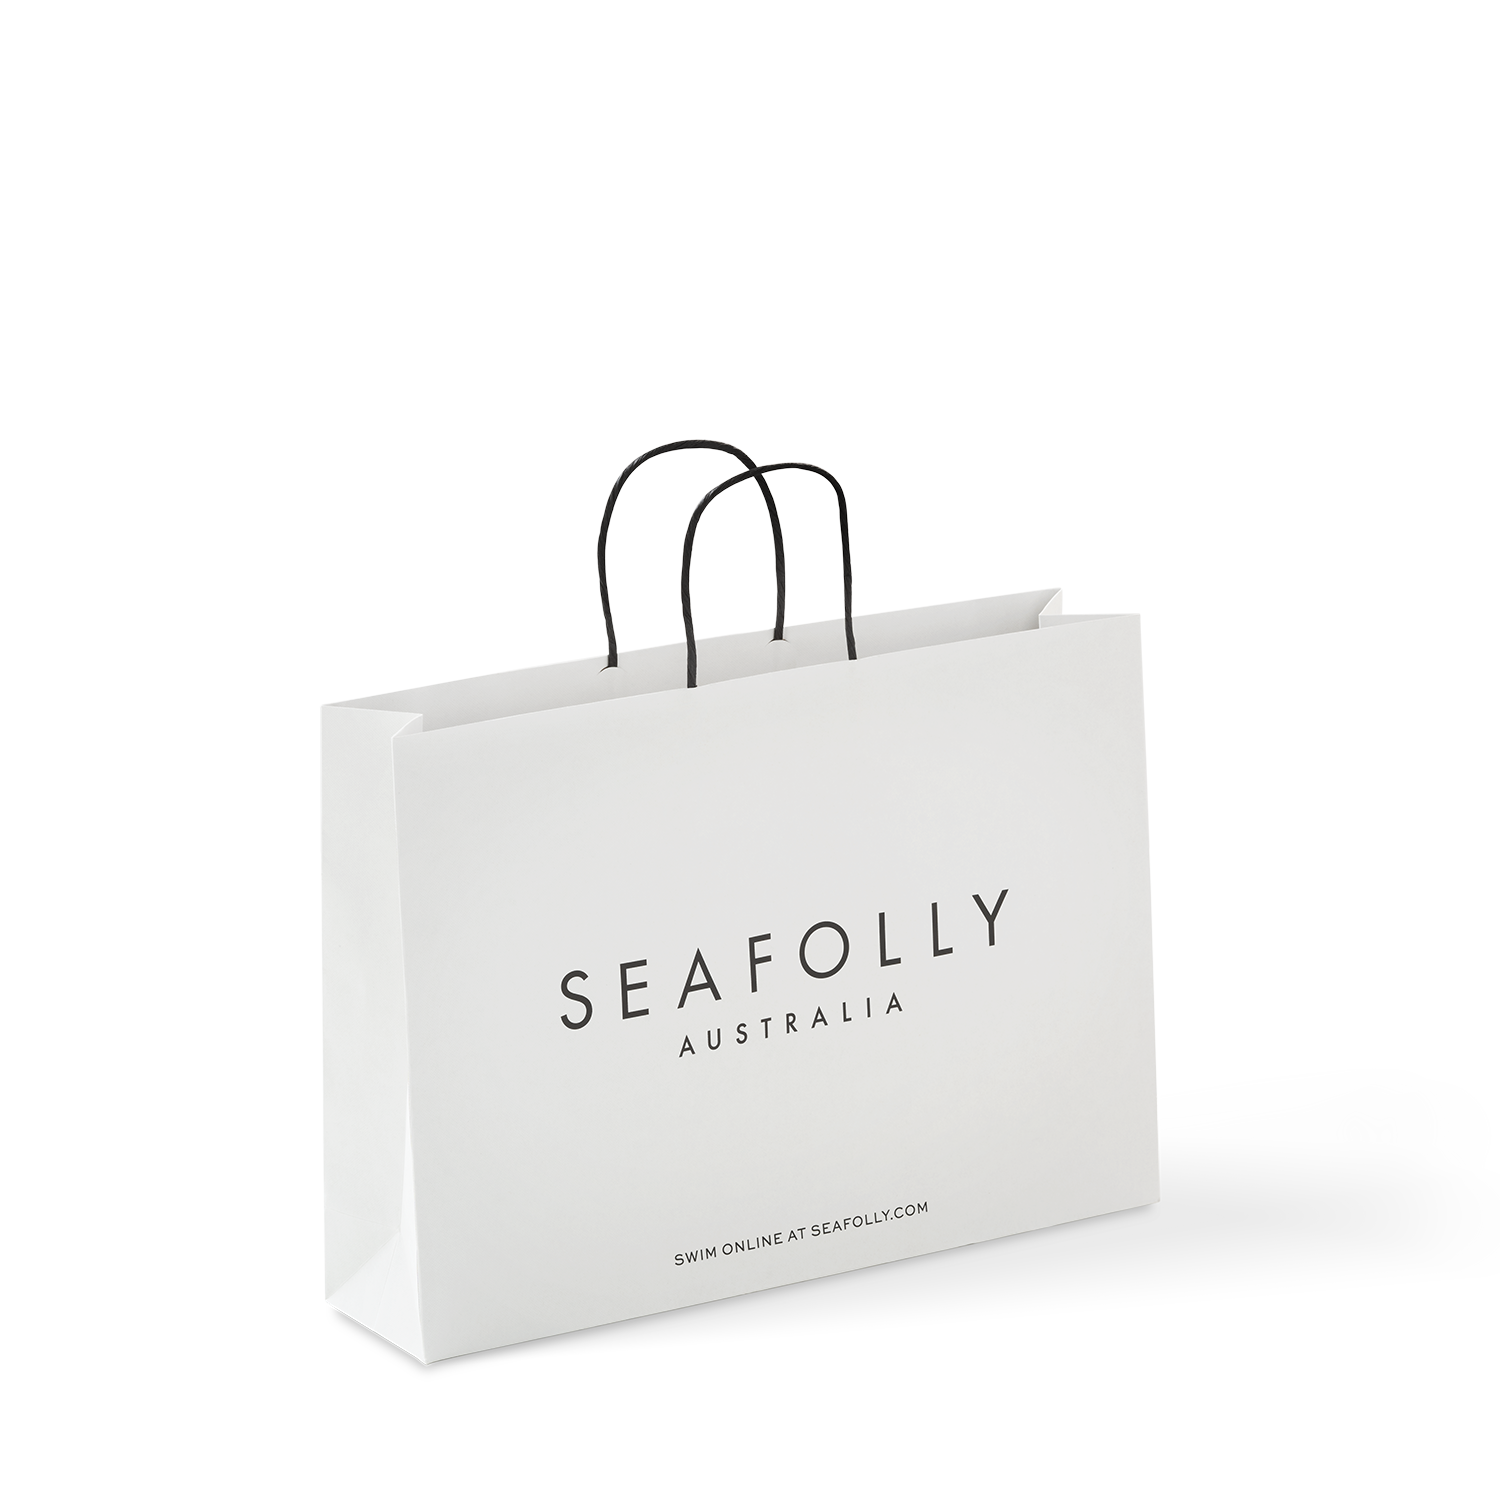 PaperPak Gallery Seafolly branded paper bag with paper twist handle